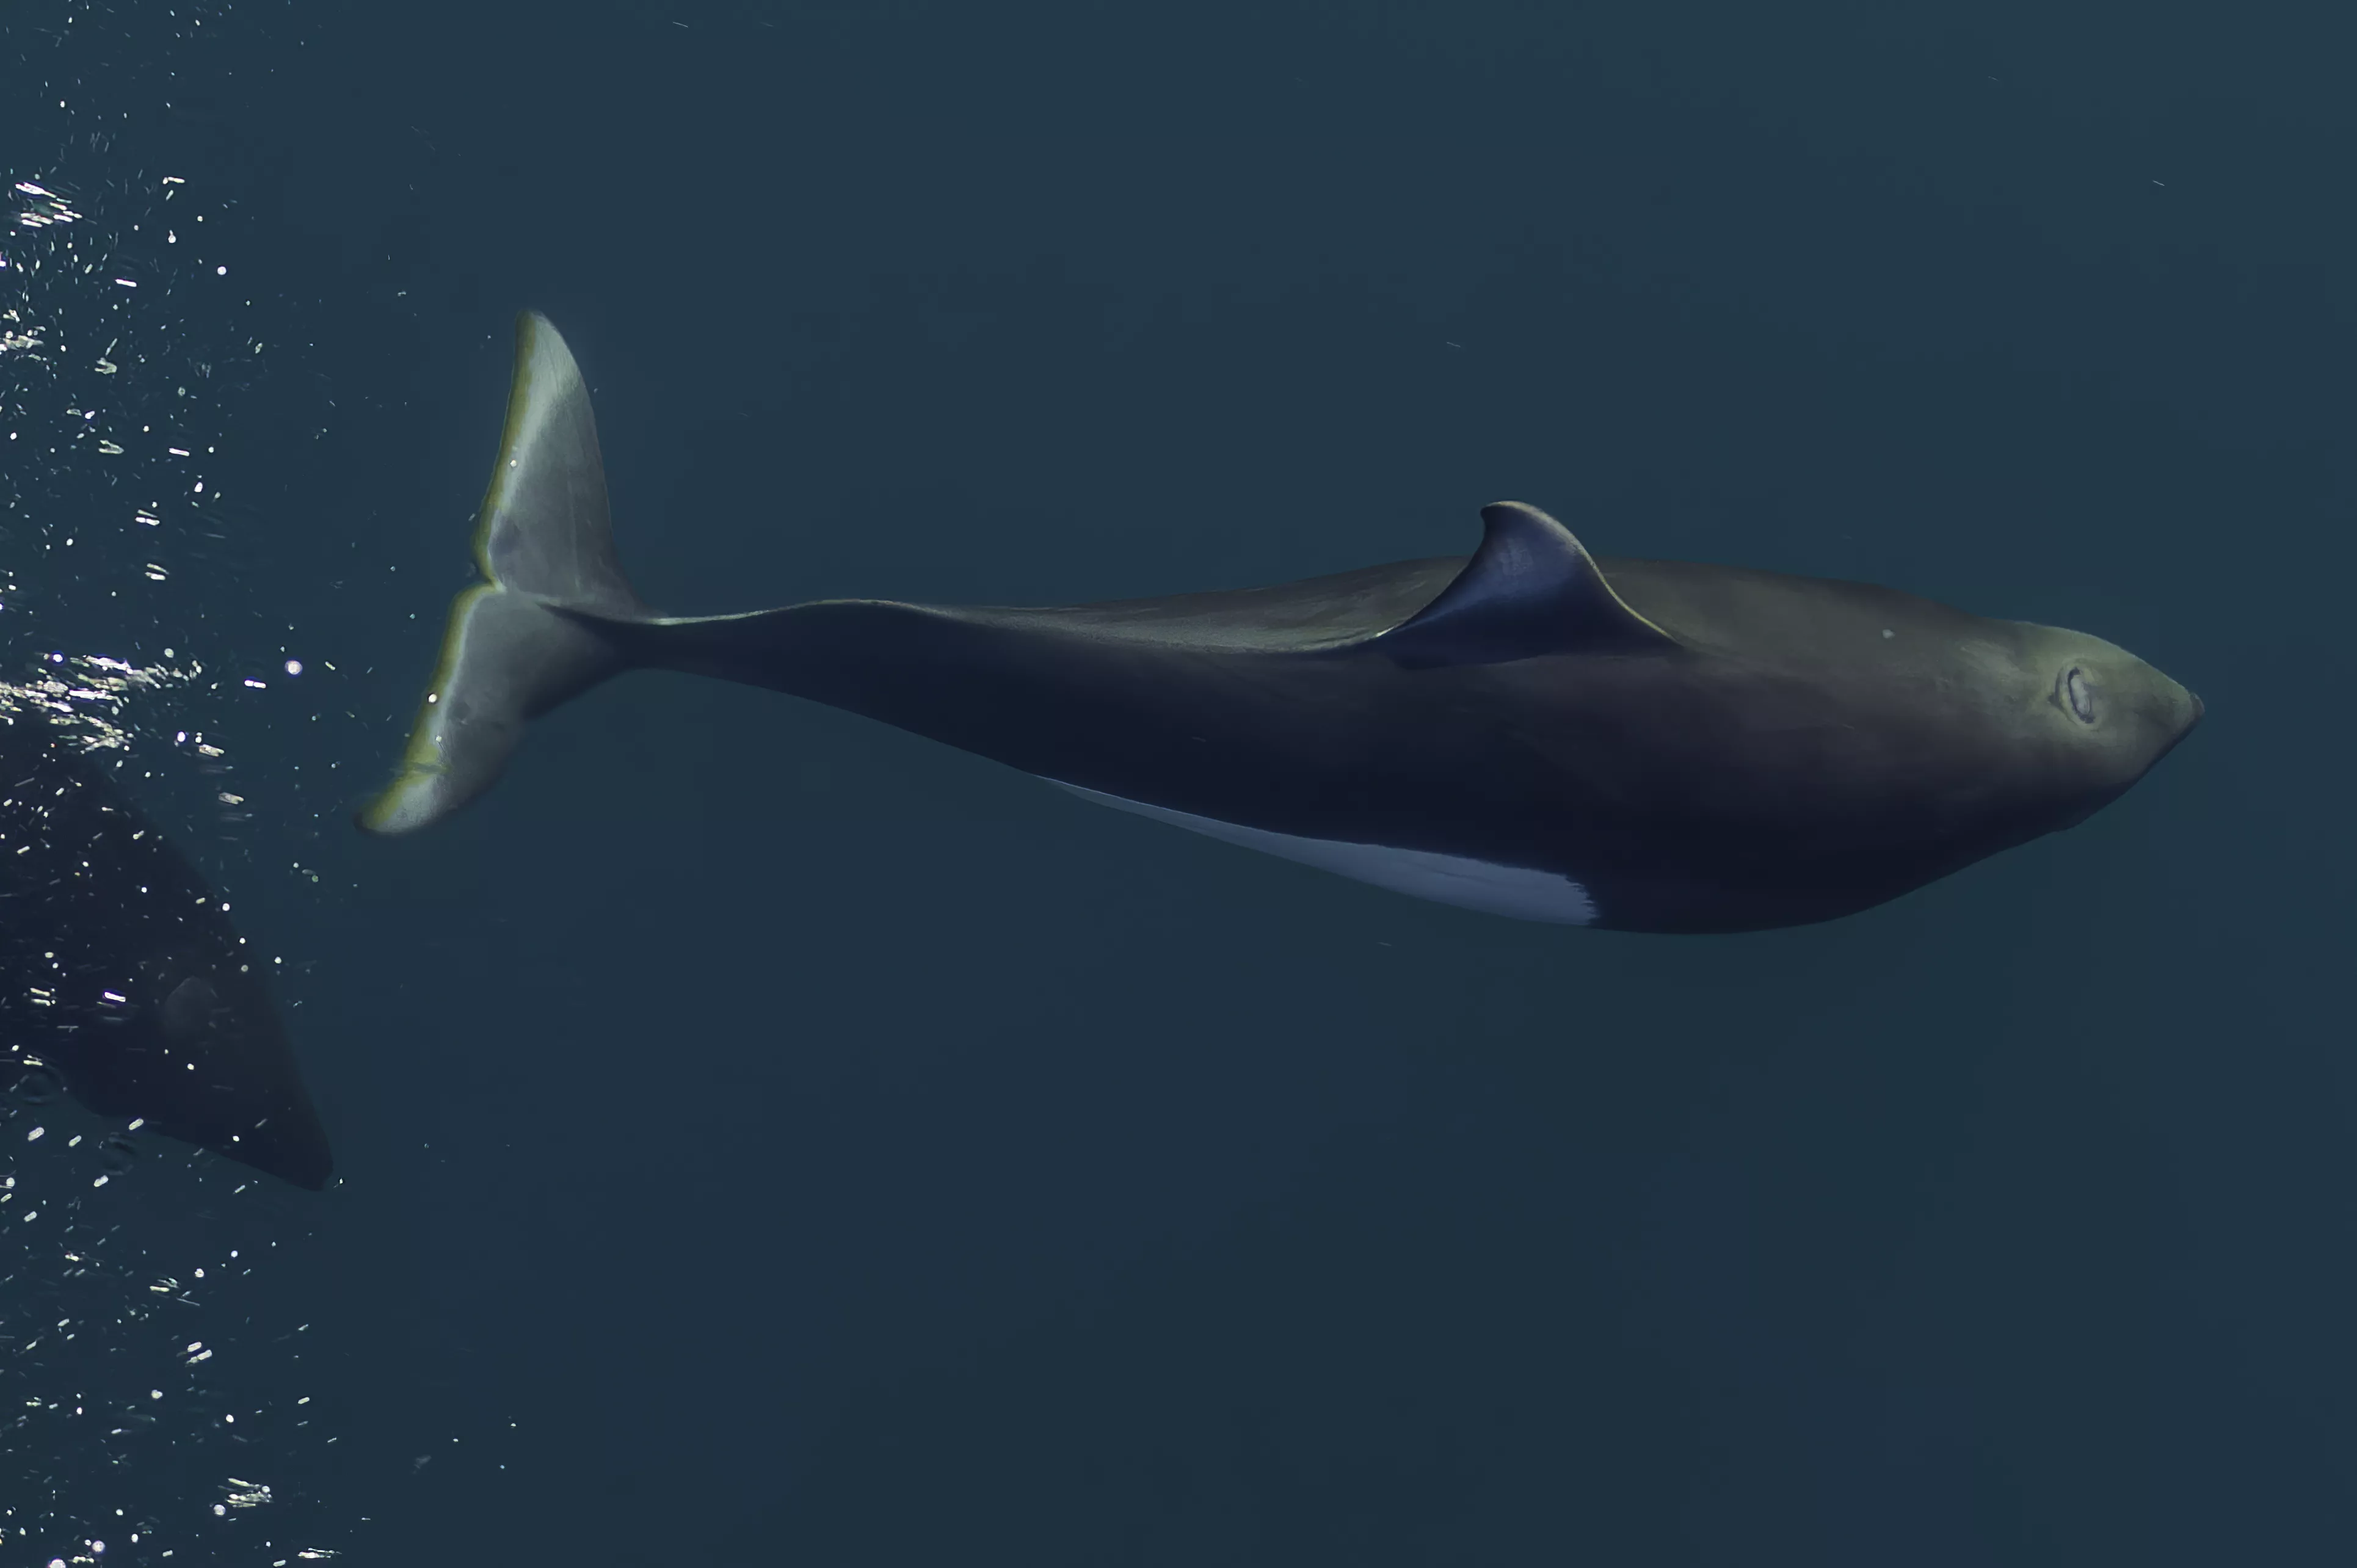 Dall's porpoise, a species of porpoise found only in the North Pacific